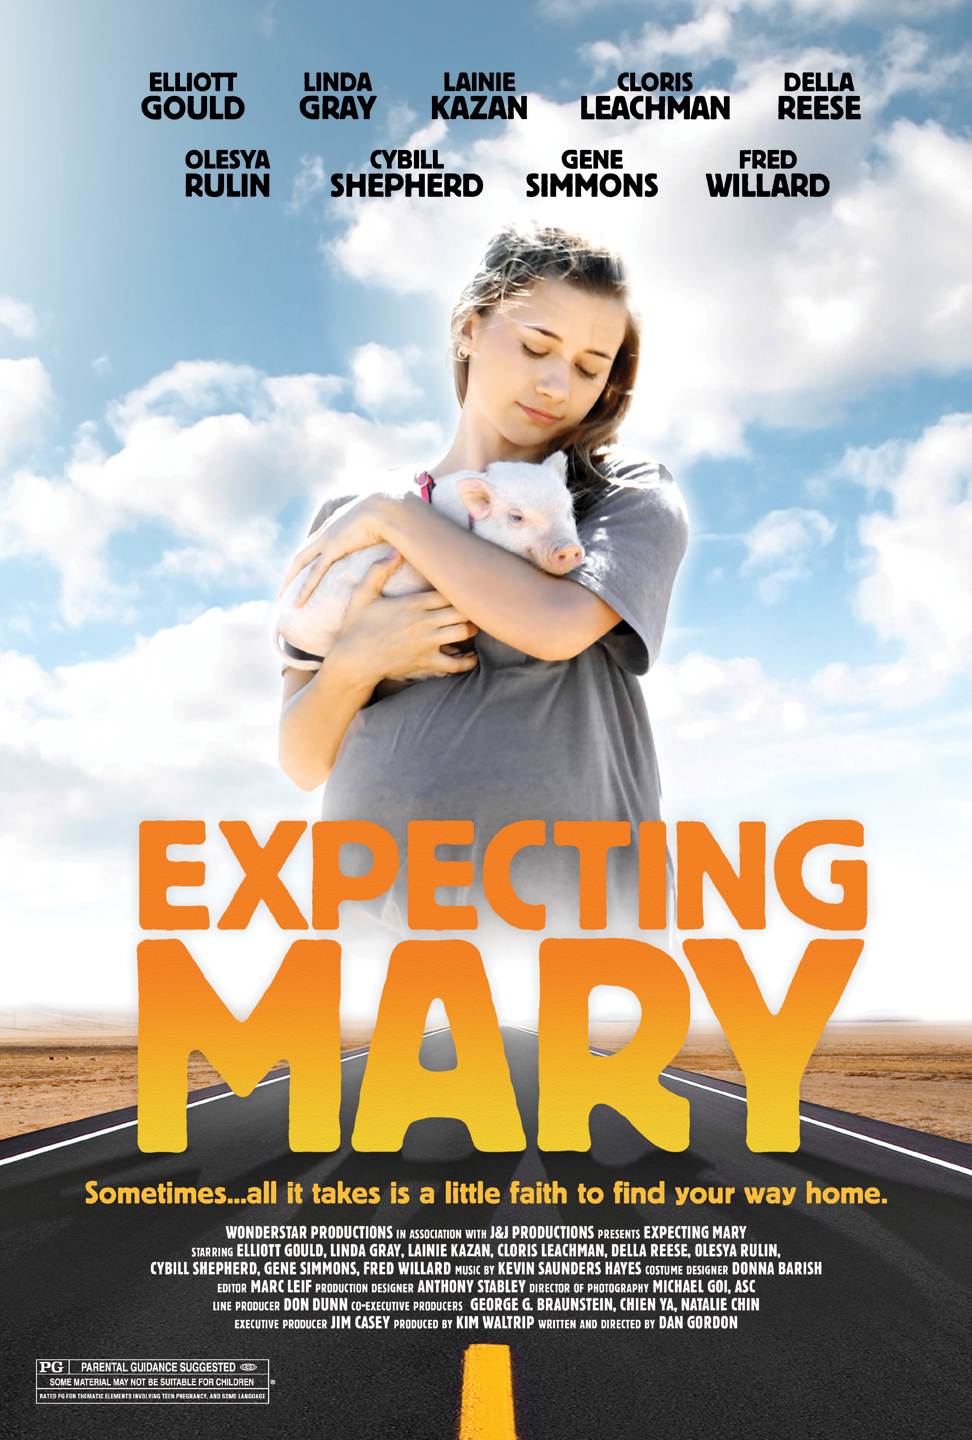 Expecting-Mary-Poster-27x40-A.jpg